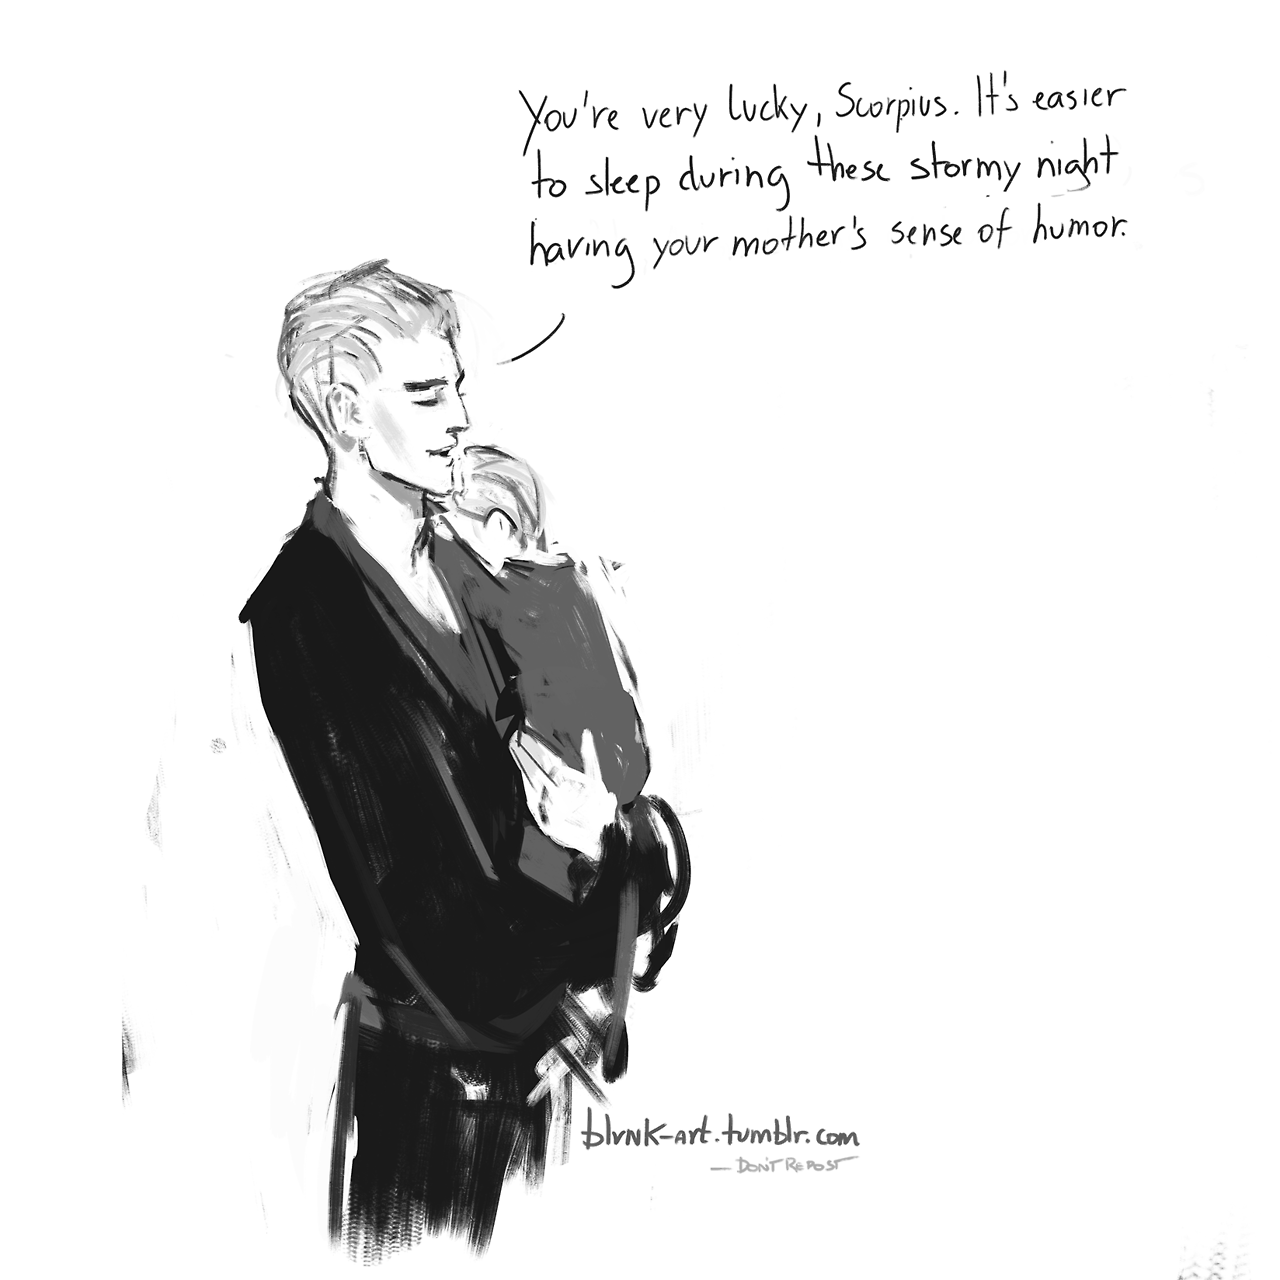 Oh Scorbus! — blvnk-art: Talking to his baby son distracts...